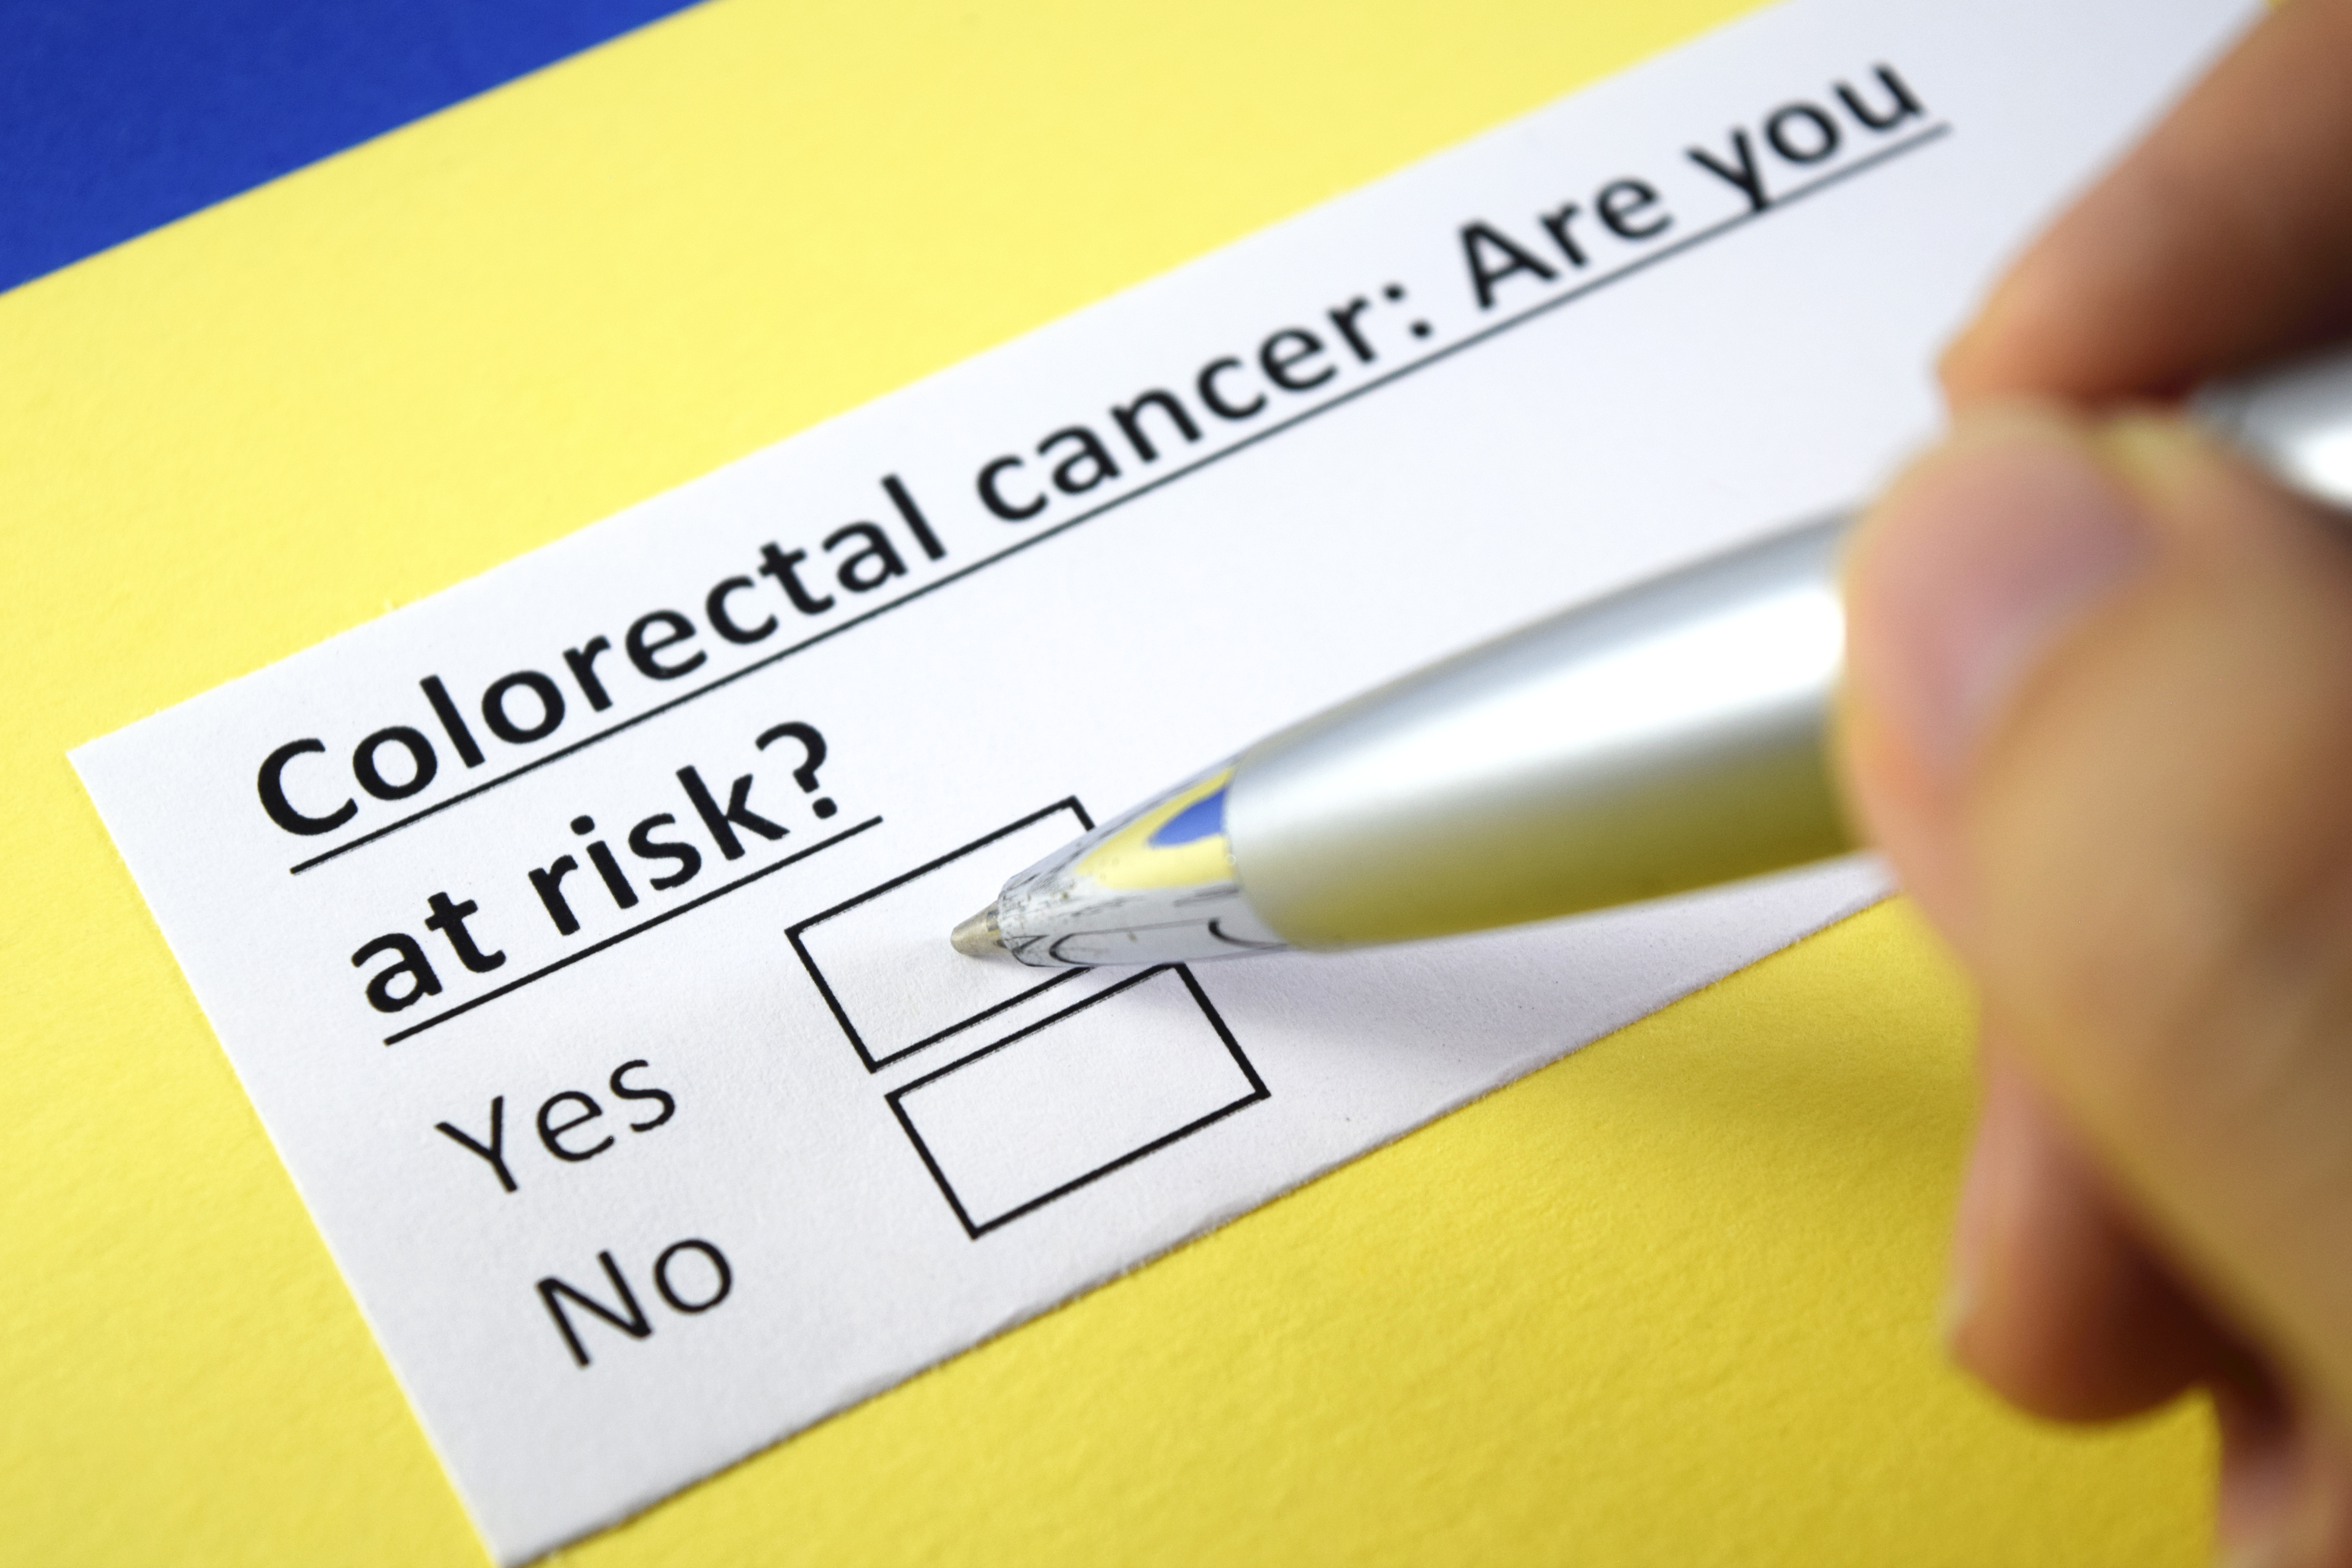 The subjective decision of cessation of colorectal cancer screening